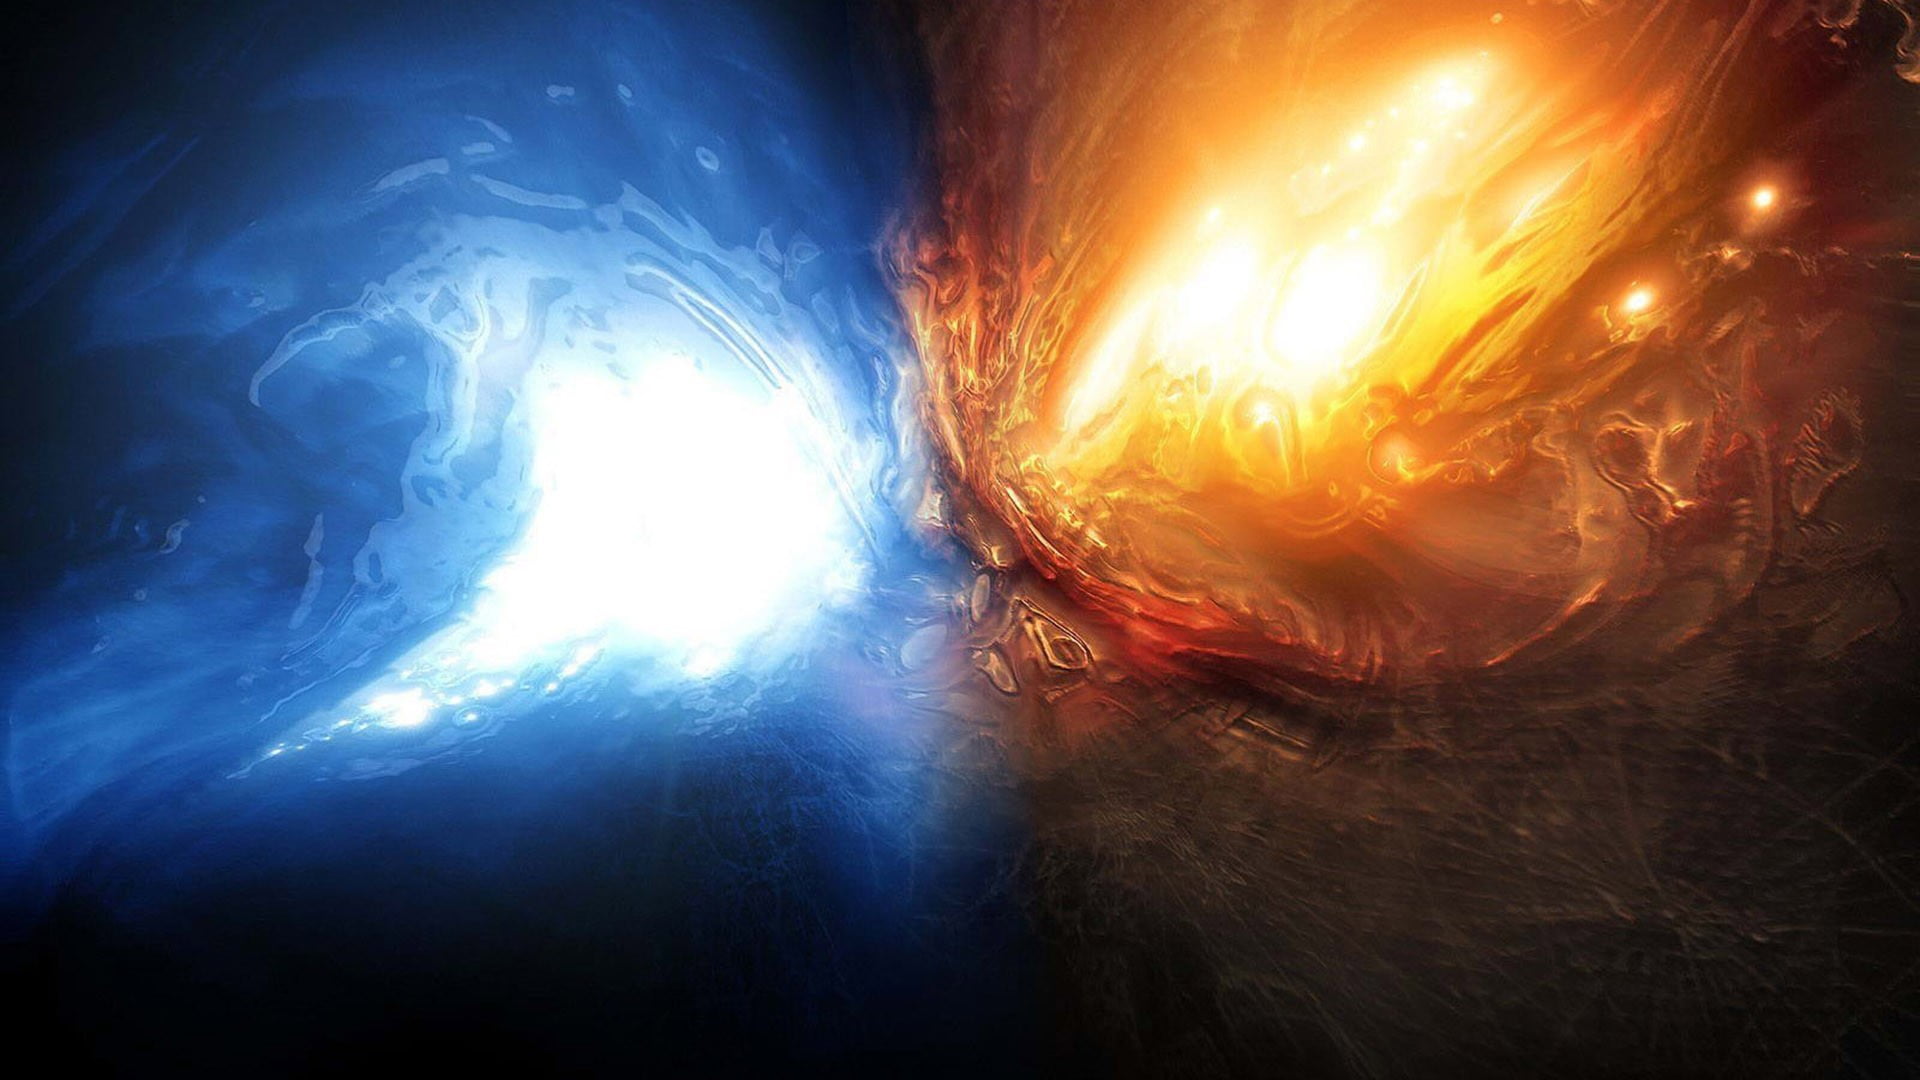 Blue And Red Digital Wallpaper Space Fire Ice Hd Wallpaper Wallpaper Flare